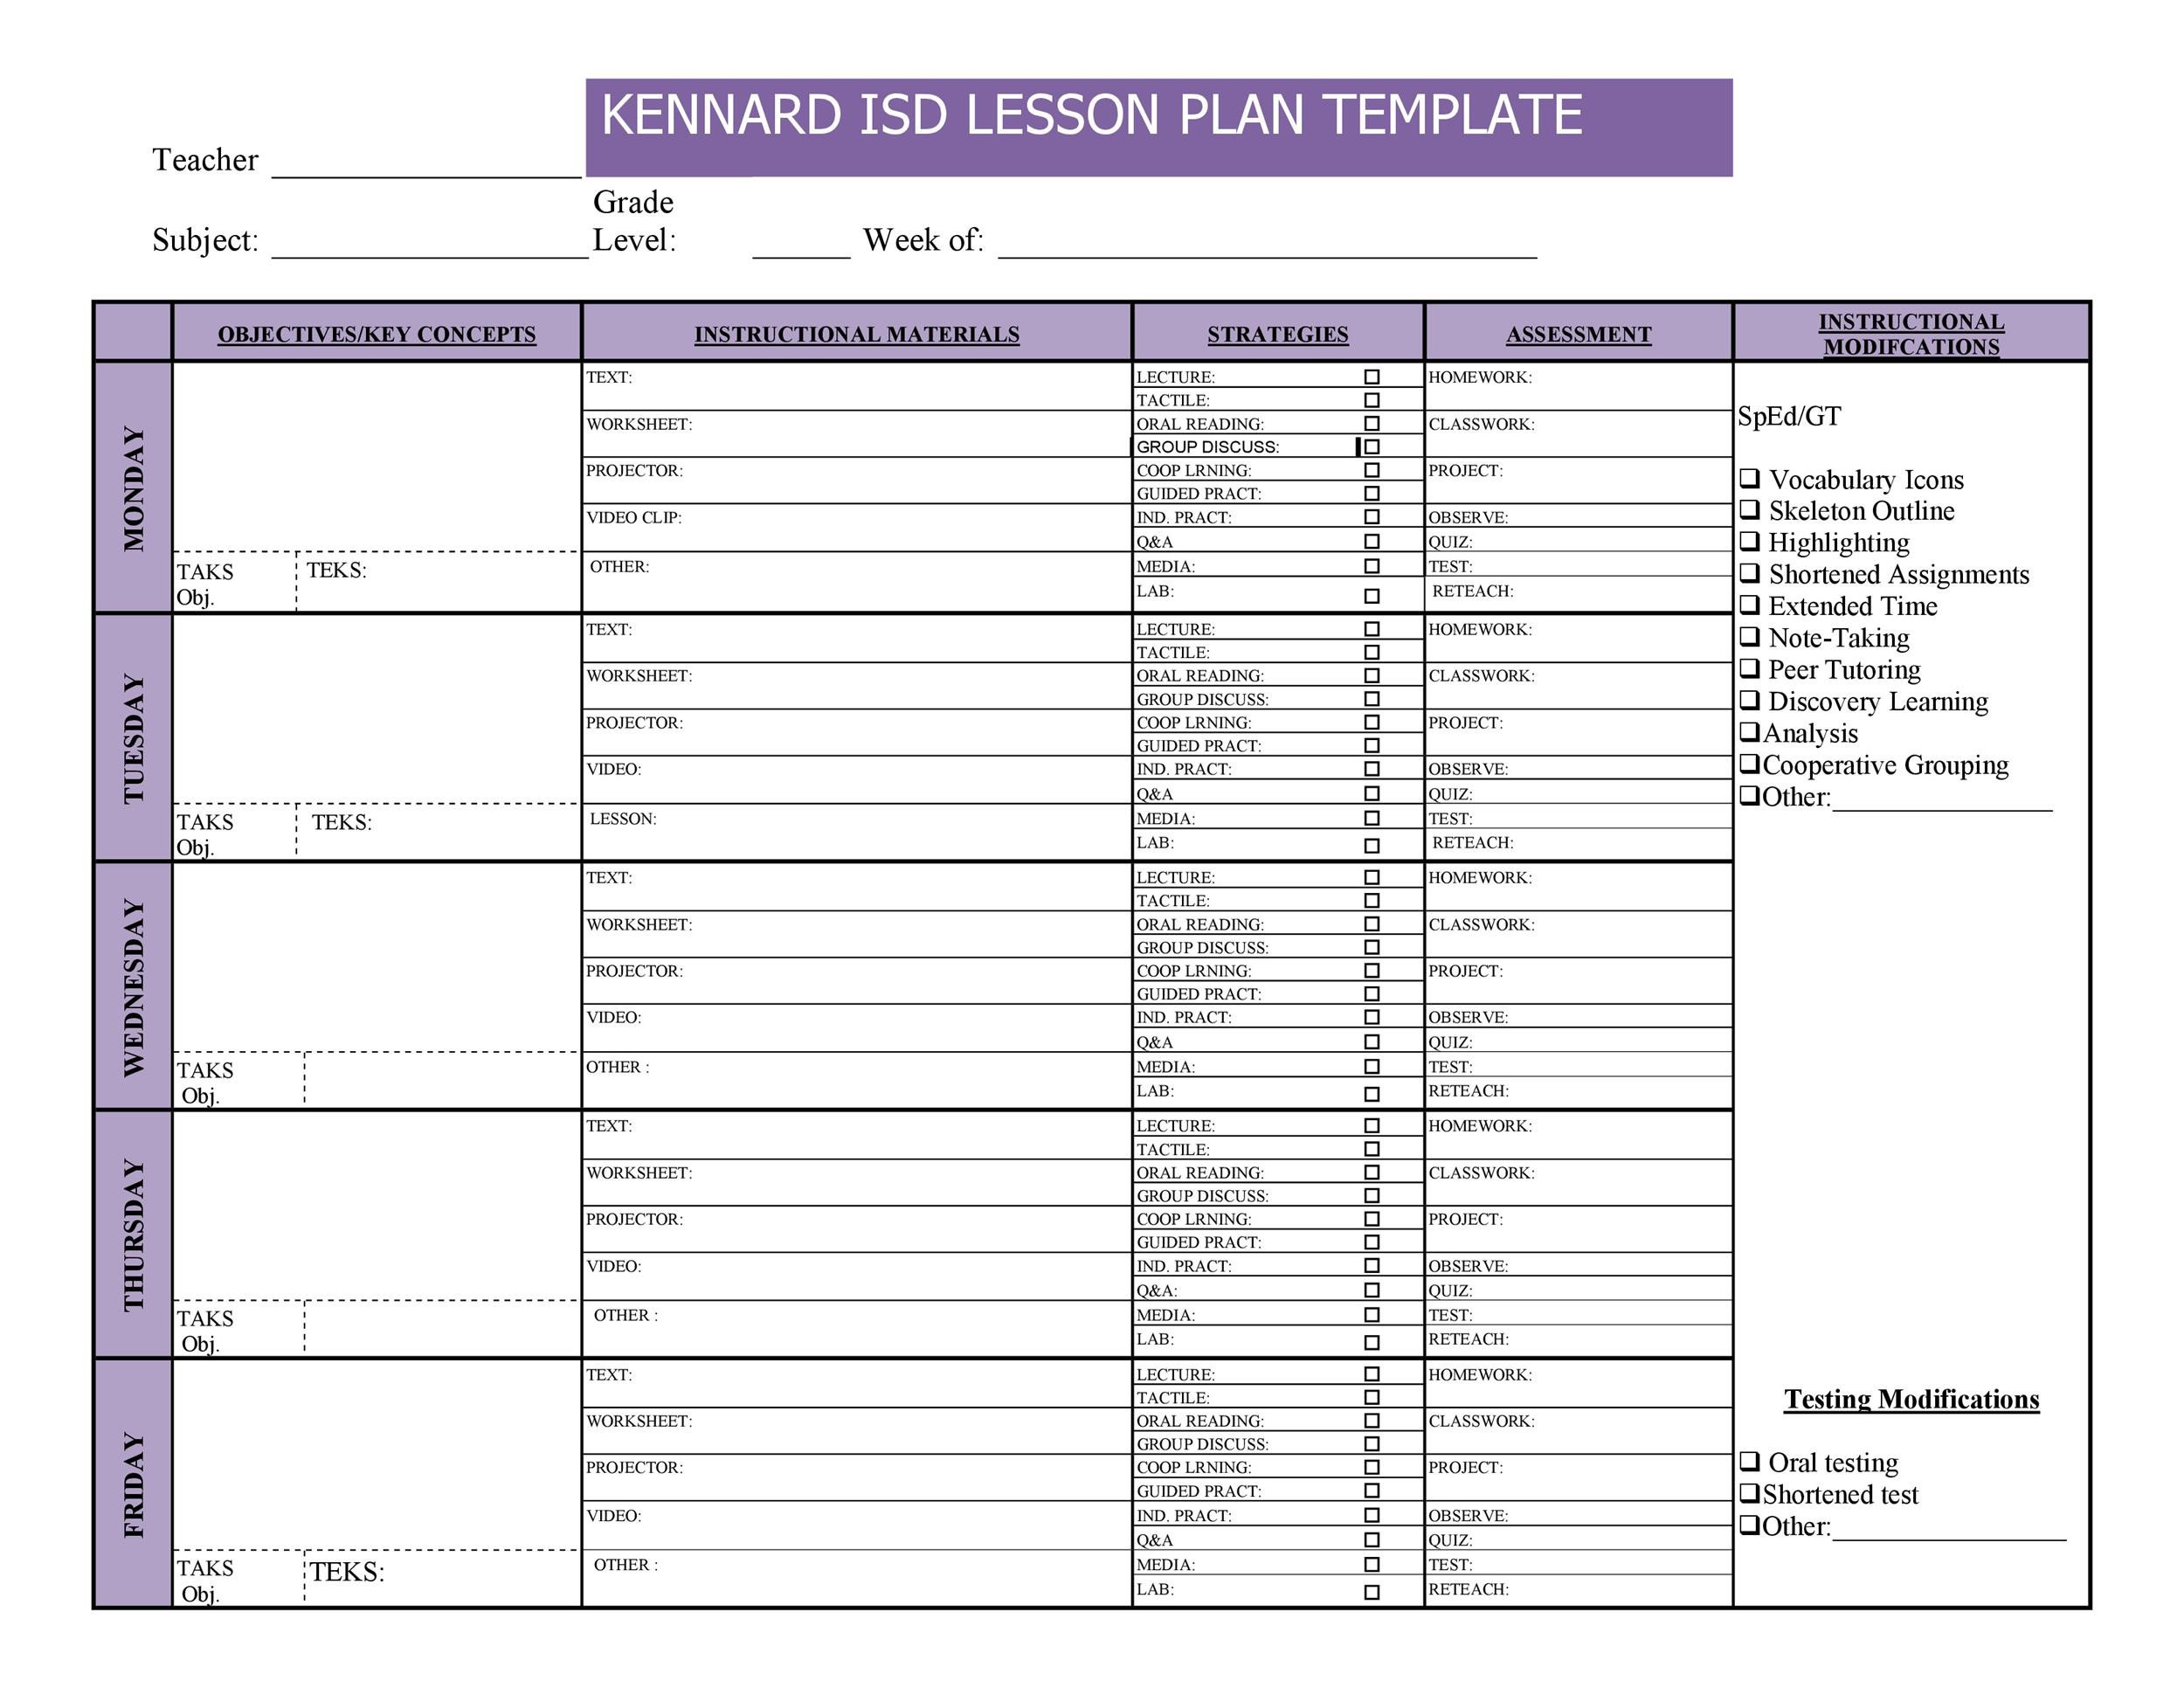 Free Online Lesson Planner 44 Free Lesson Plan Templates [ Mon Core Preschool Weekly]